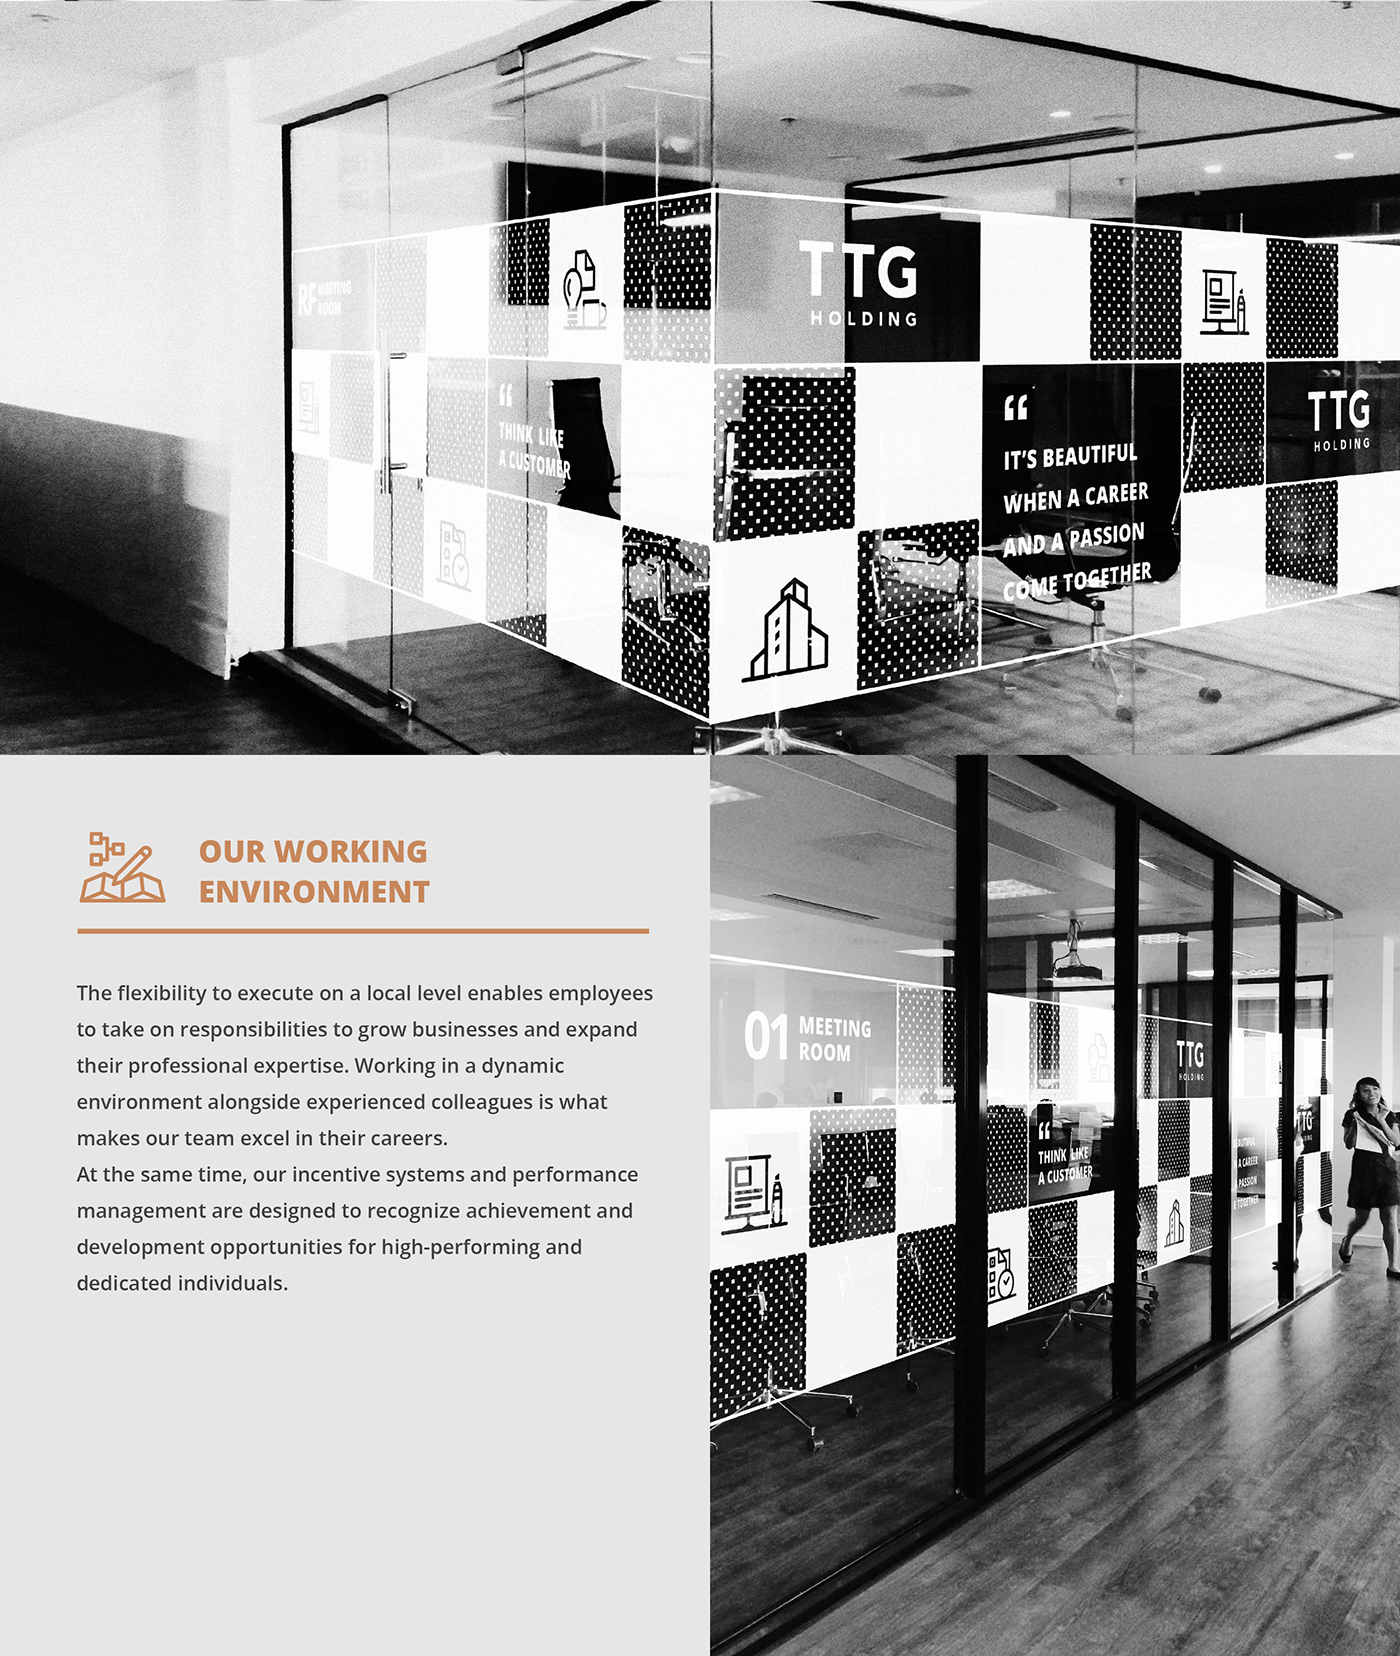 holding TTG company group reststop Event creative restaurant product working space interdisciplinary real estate profile black copper